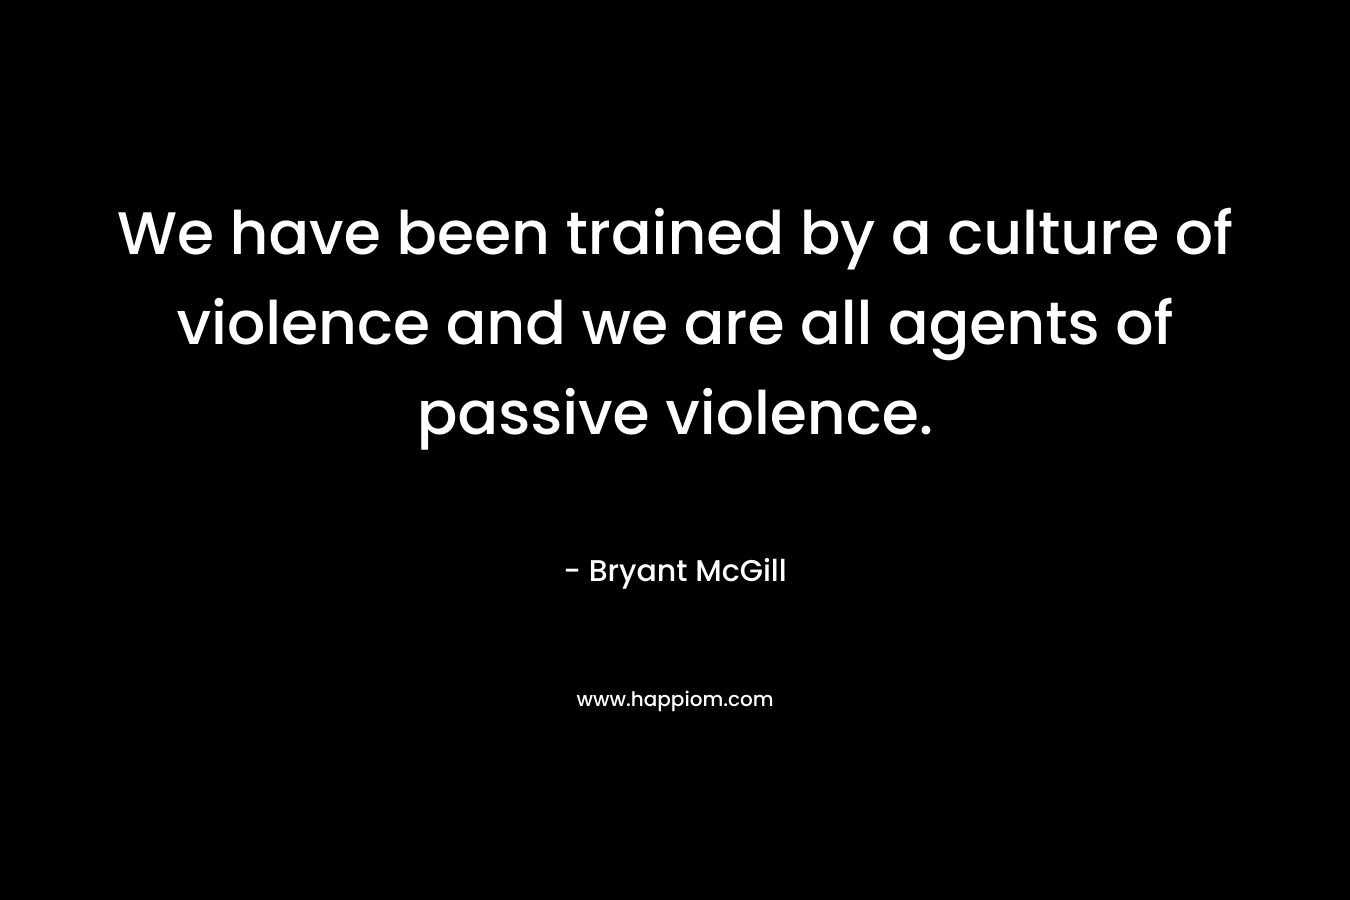 We have been trained by a culture of violence and we are all agents of passive violence.